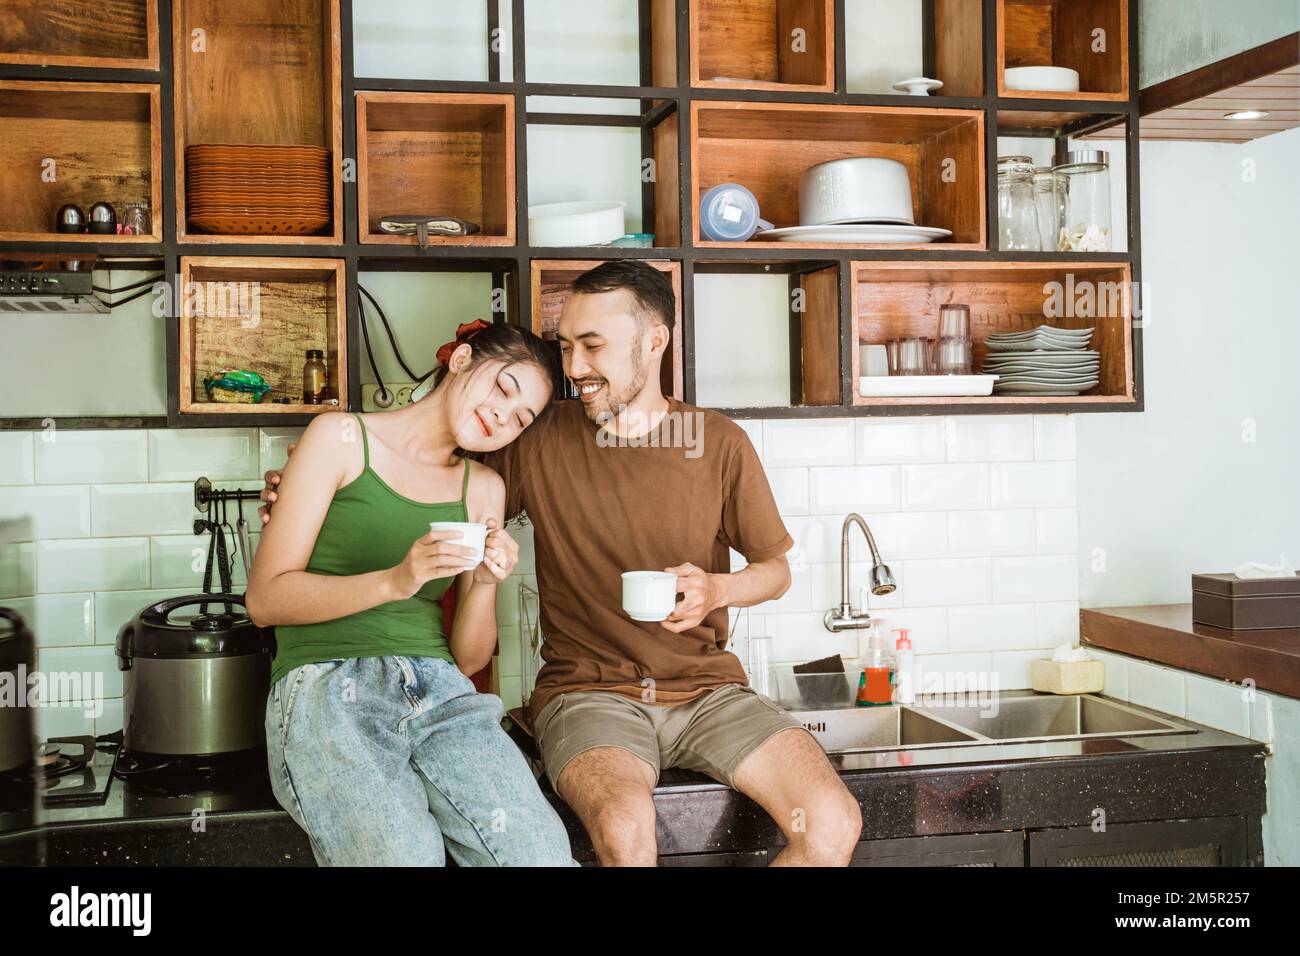 asian man and woman dating while drinking coffee using cup Stock Photo